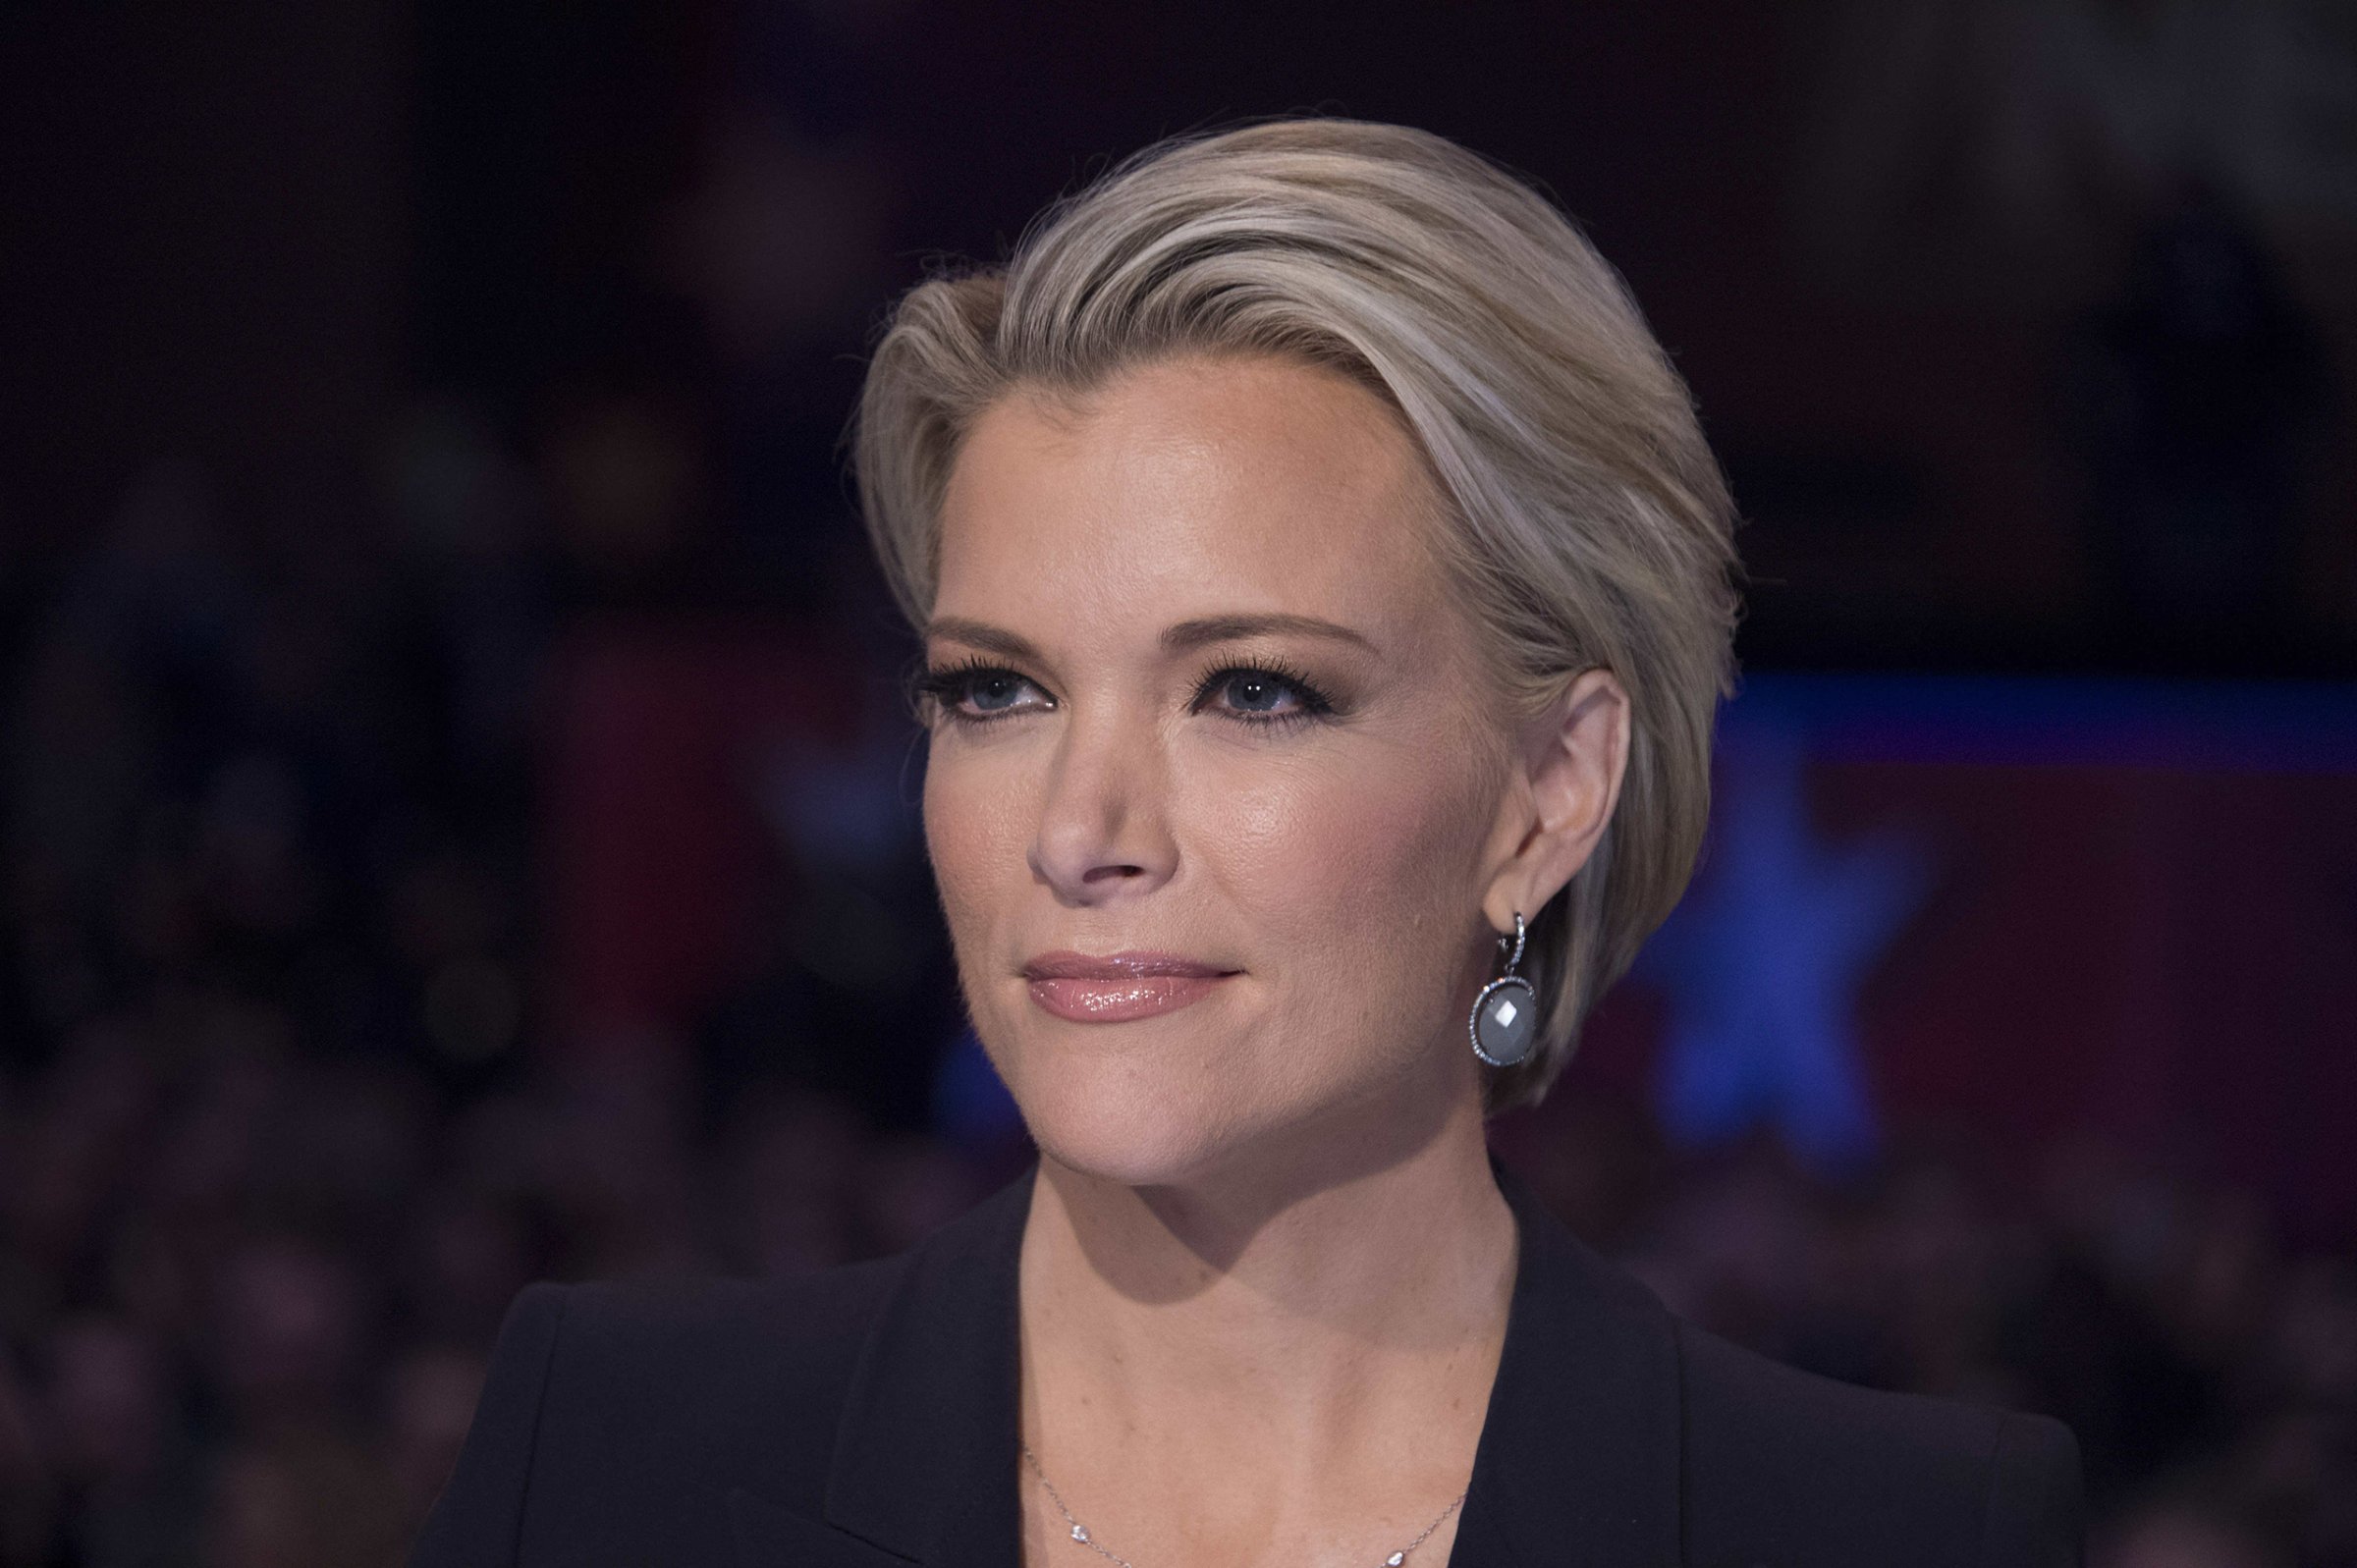 Fox News host Megyn Kelly during the Republican presidential debate at the Iowa Events Center in Des Moines, Jan. 28, 2016.